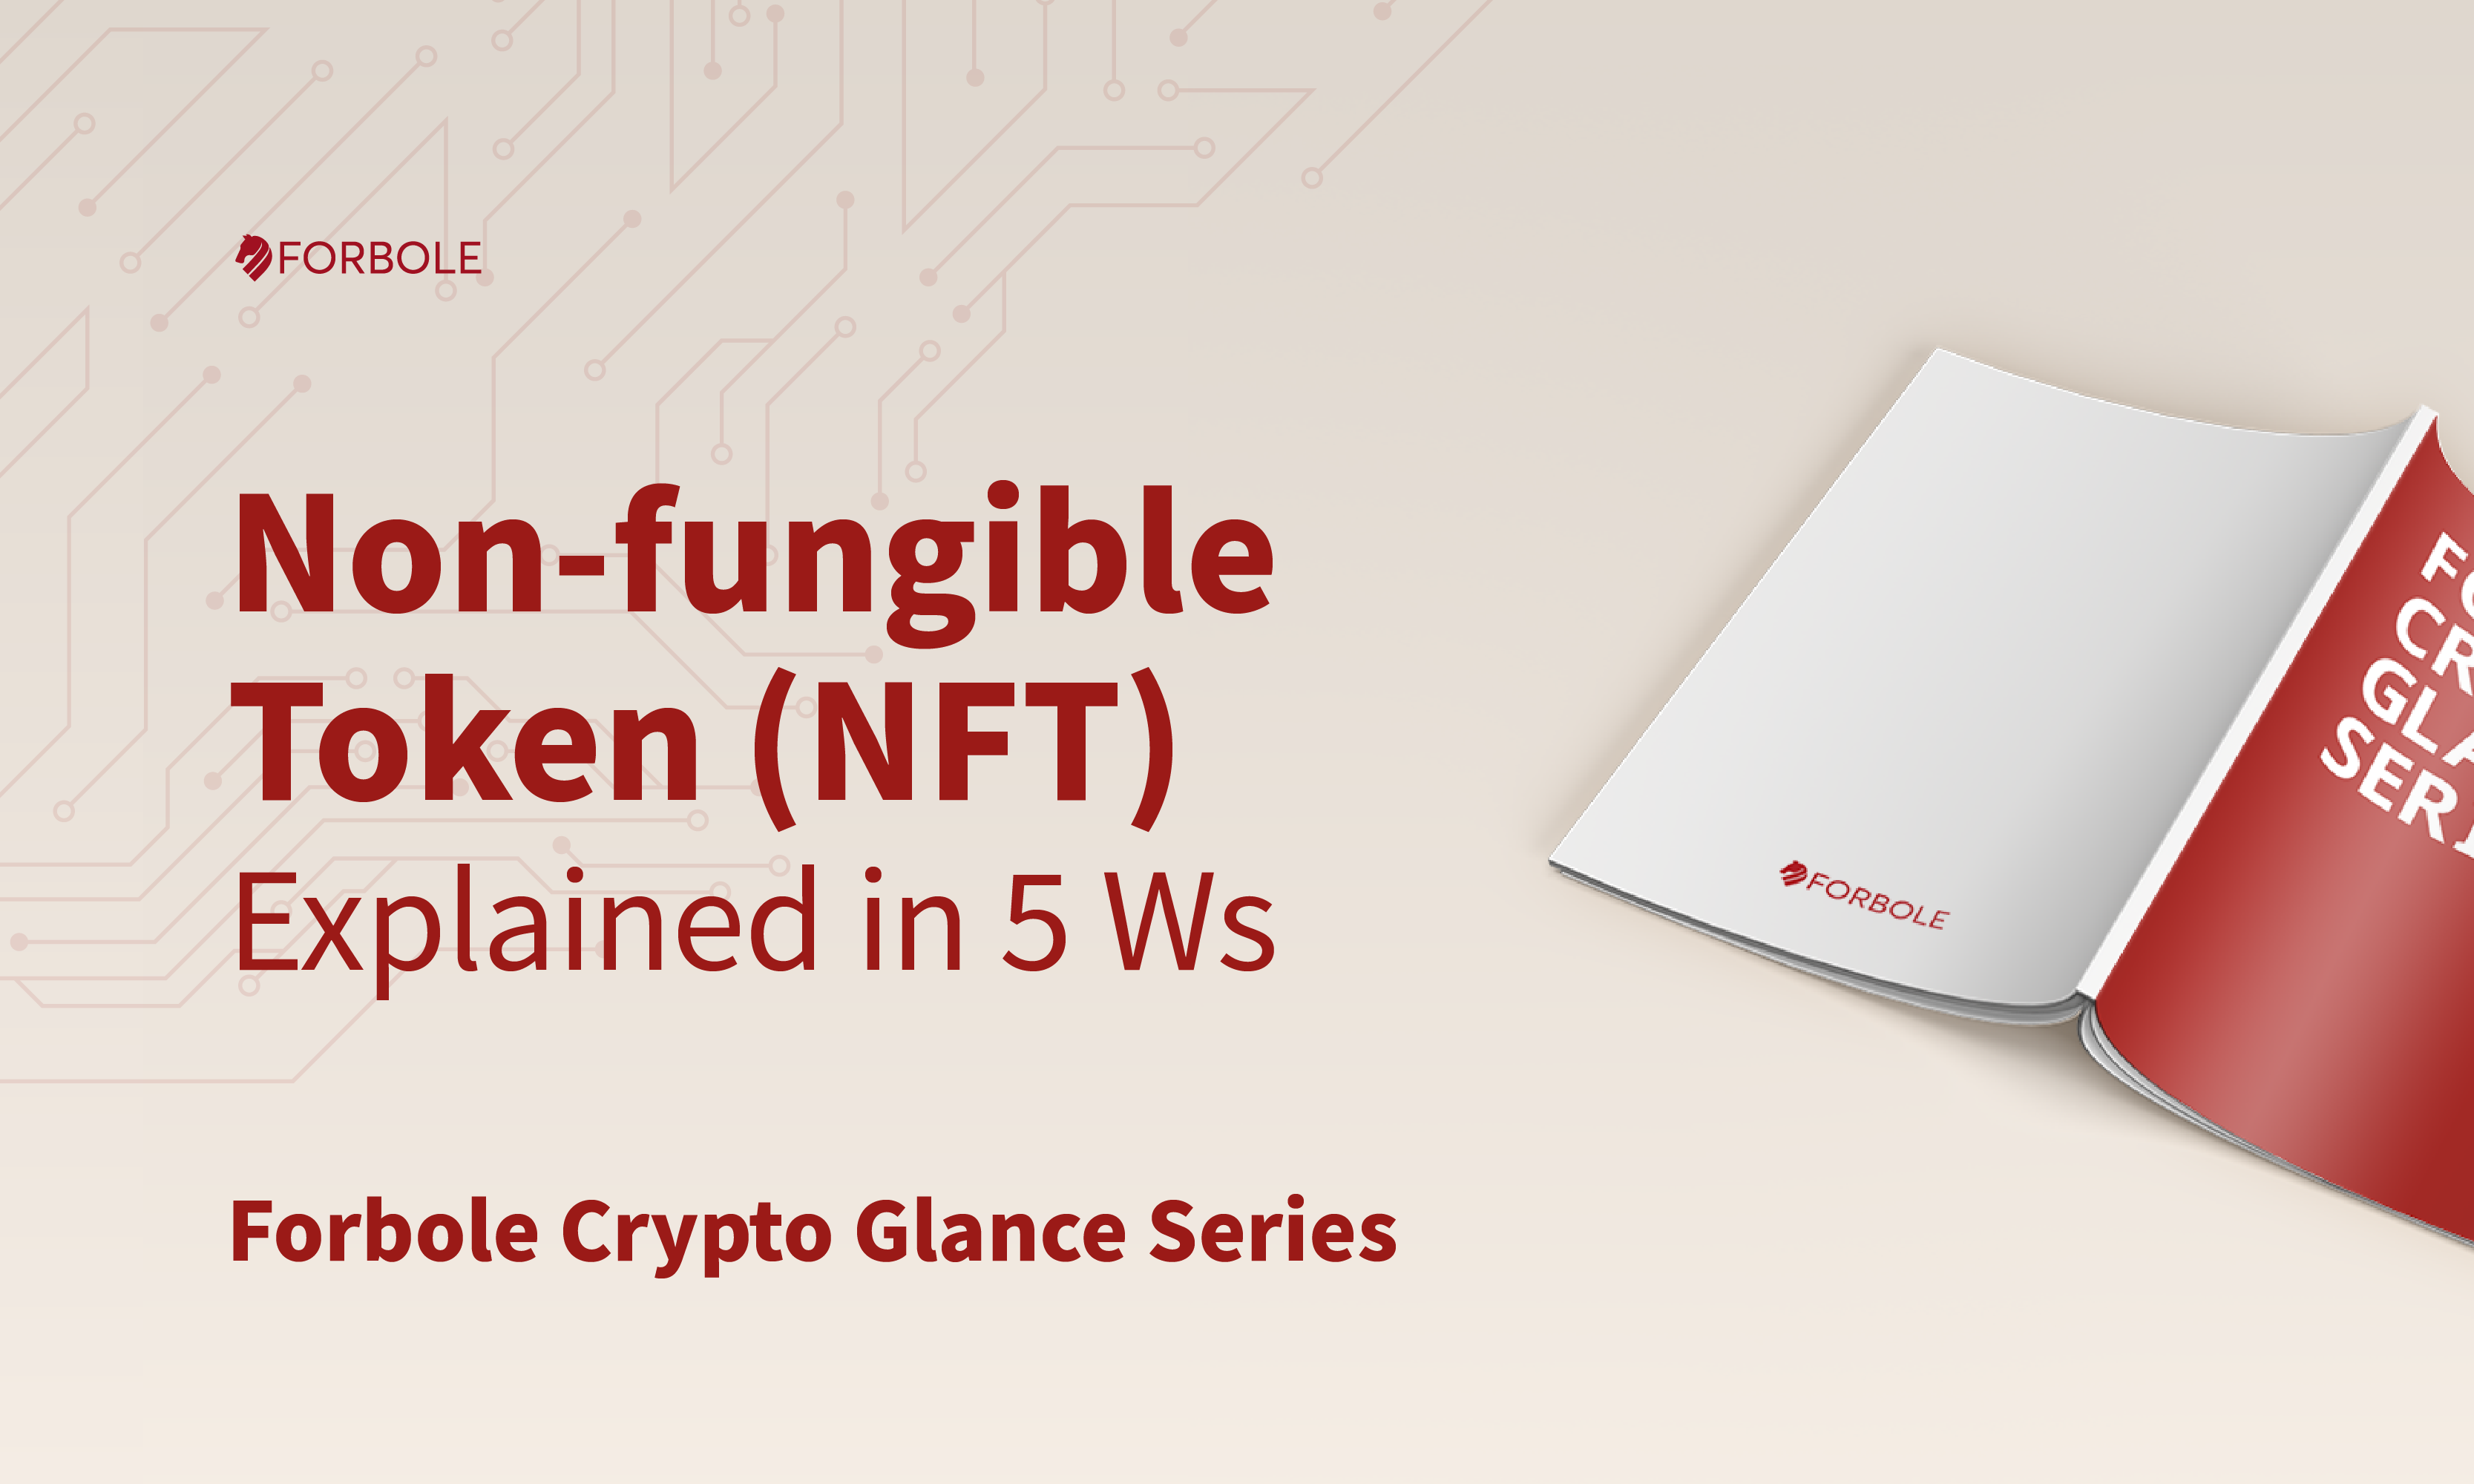 Non-fungible Token (NFT) Explained in 5 Ws